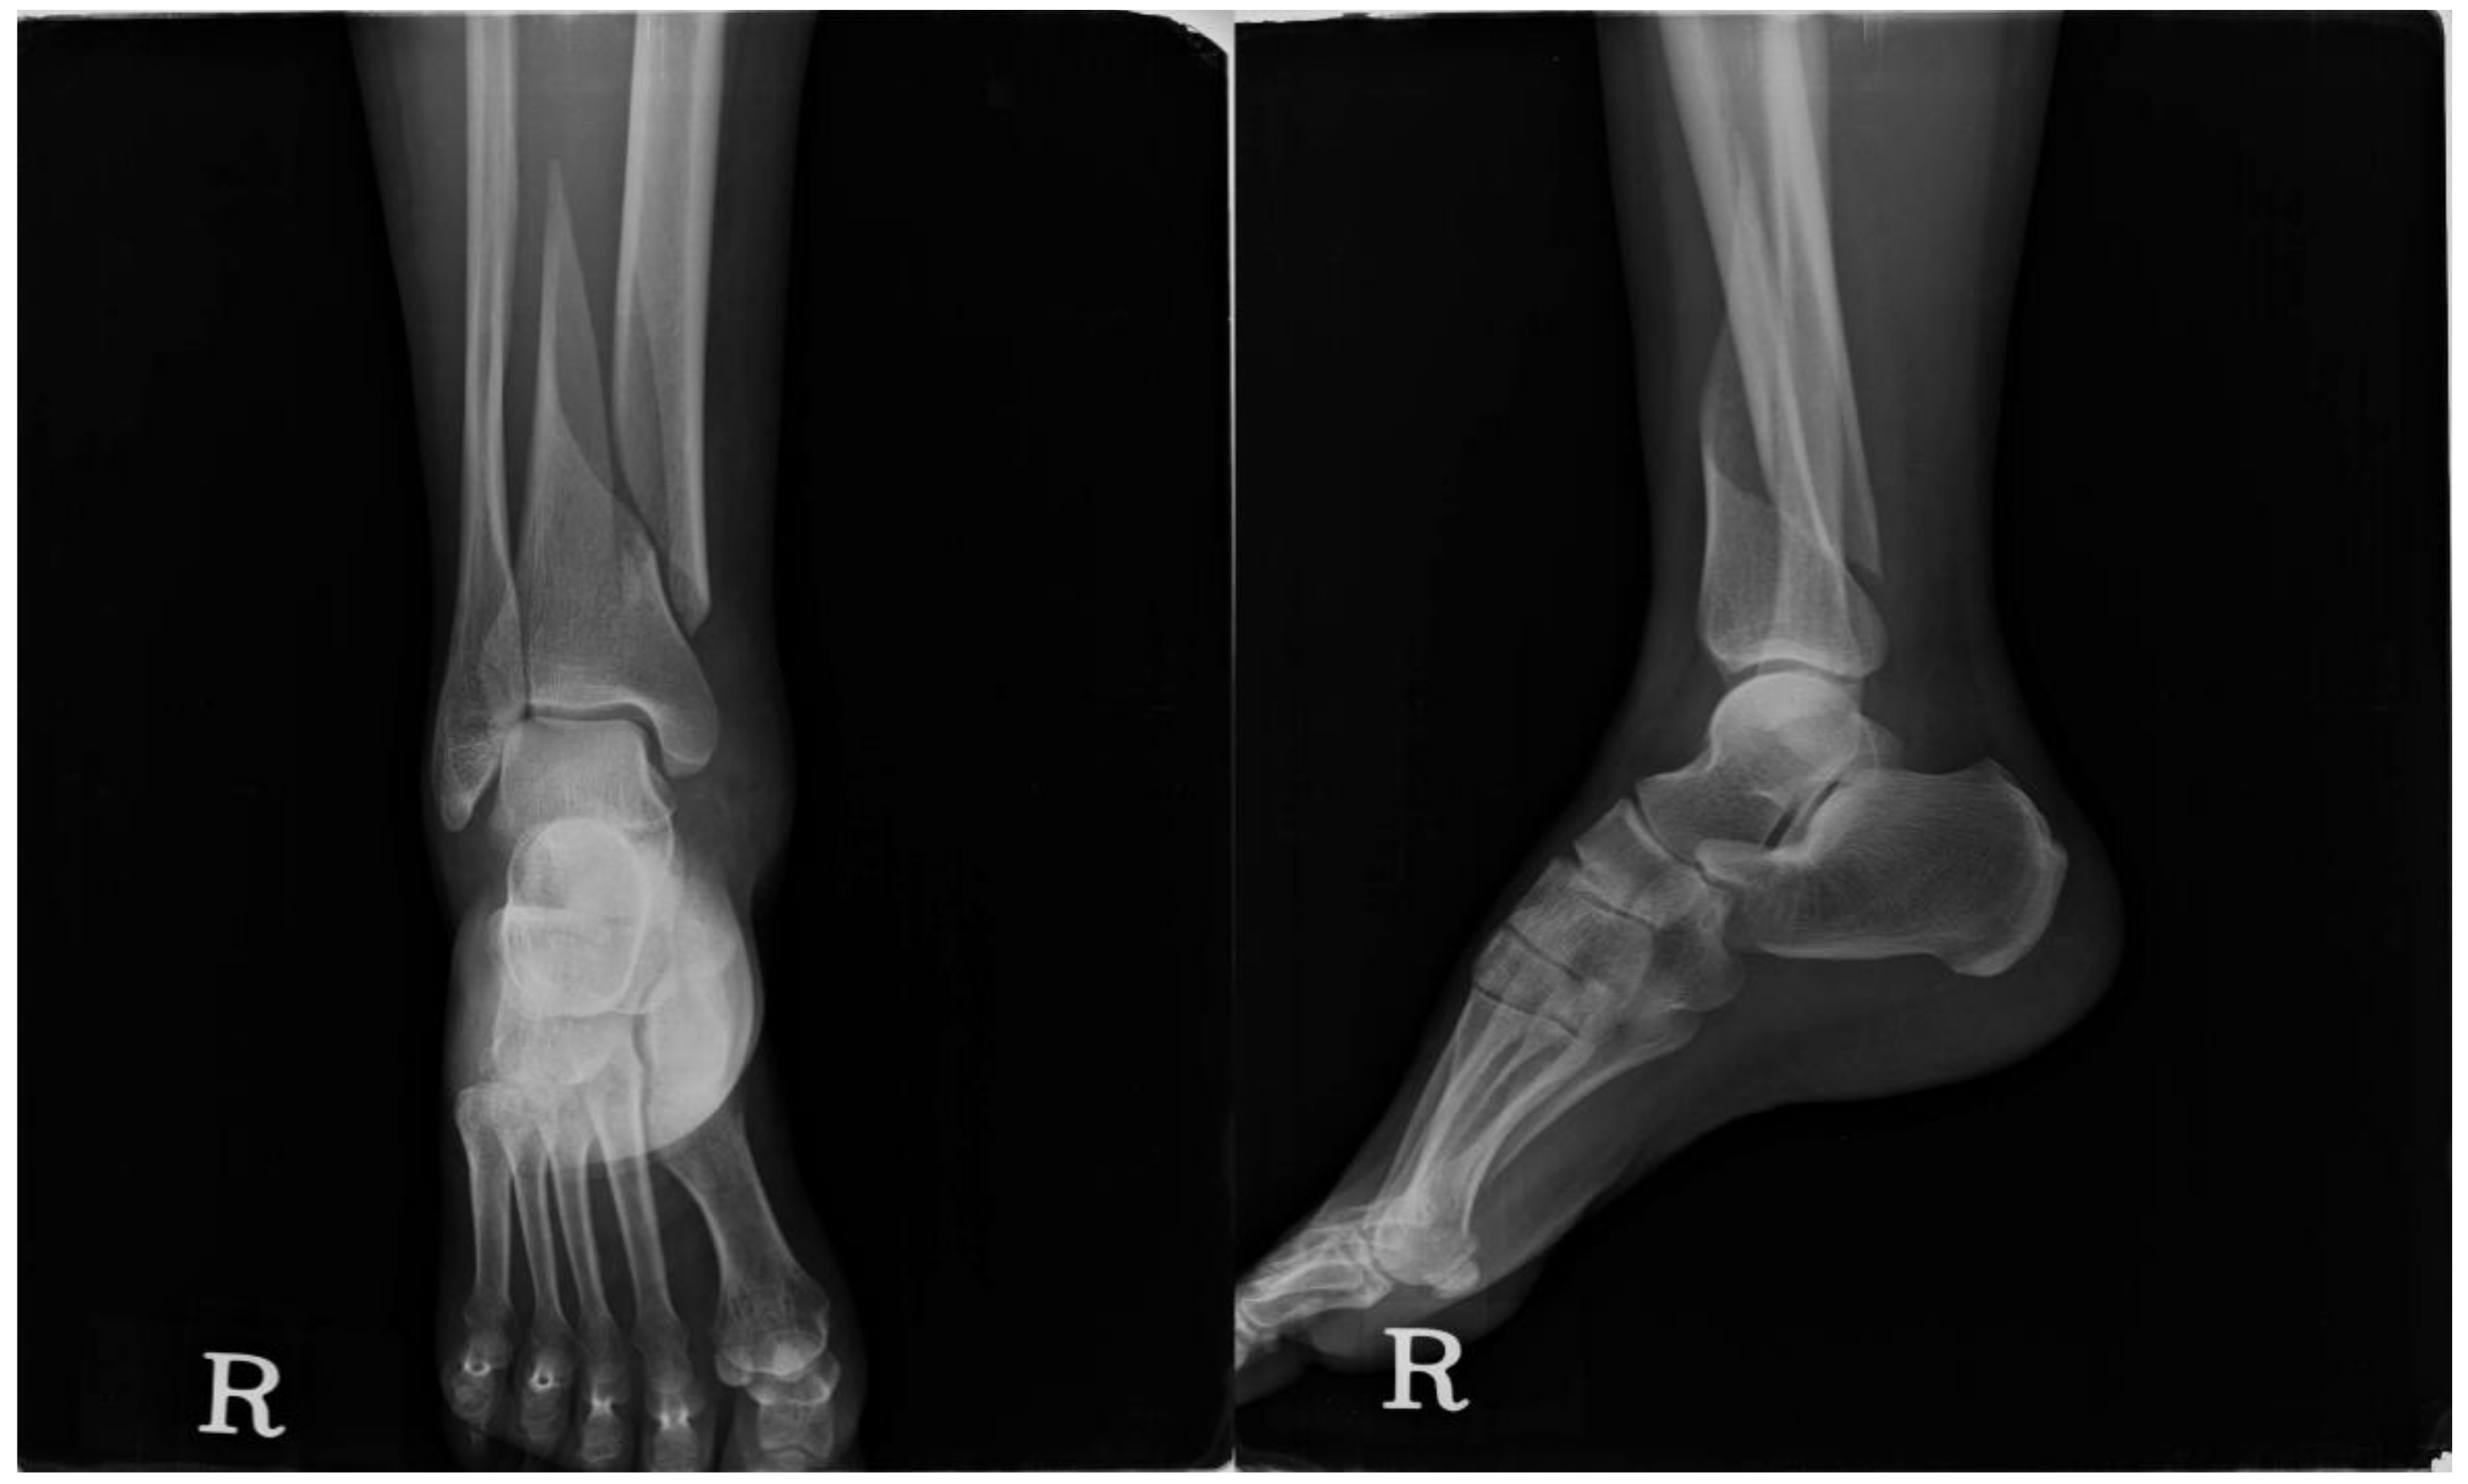 Understanding an Ankle Fracture